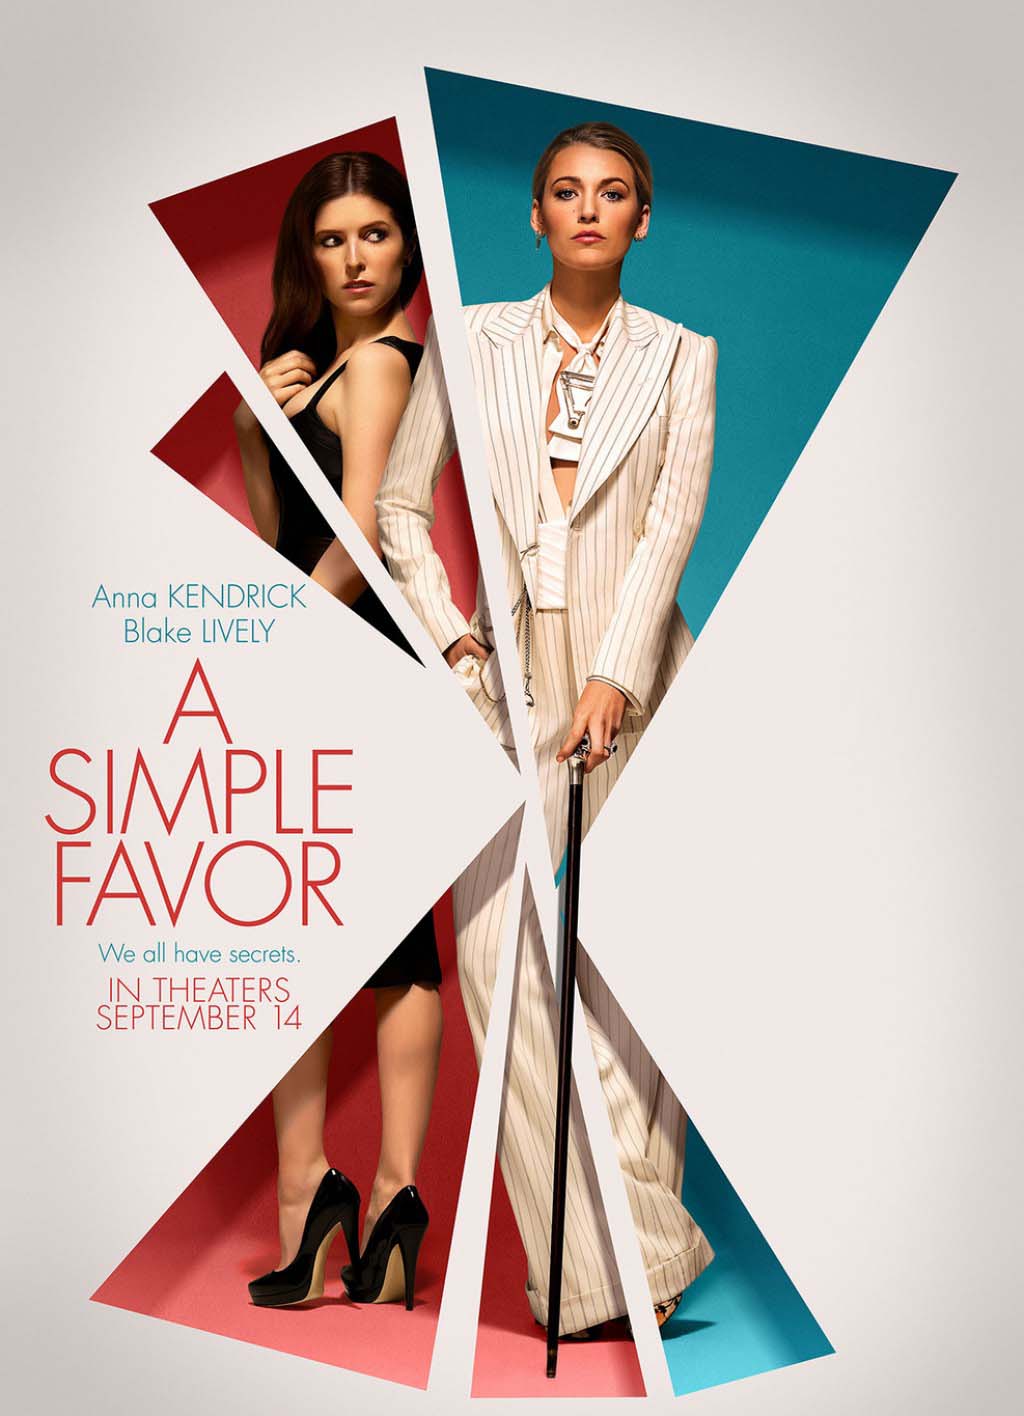 A Simple Favor (2018) Full Movie Free Online